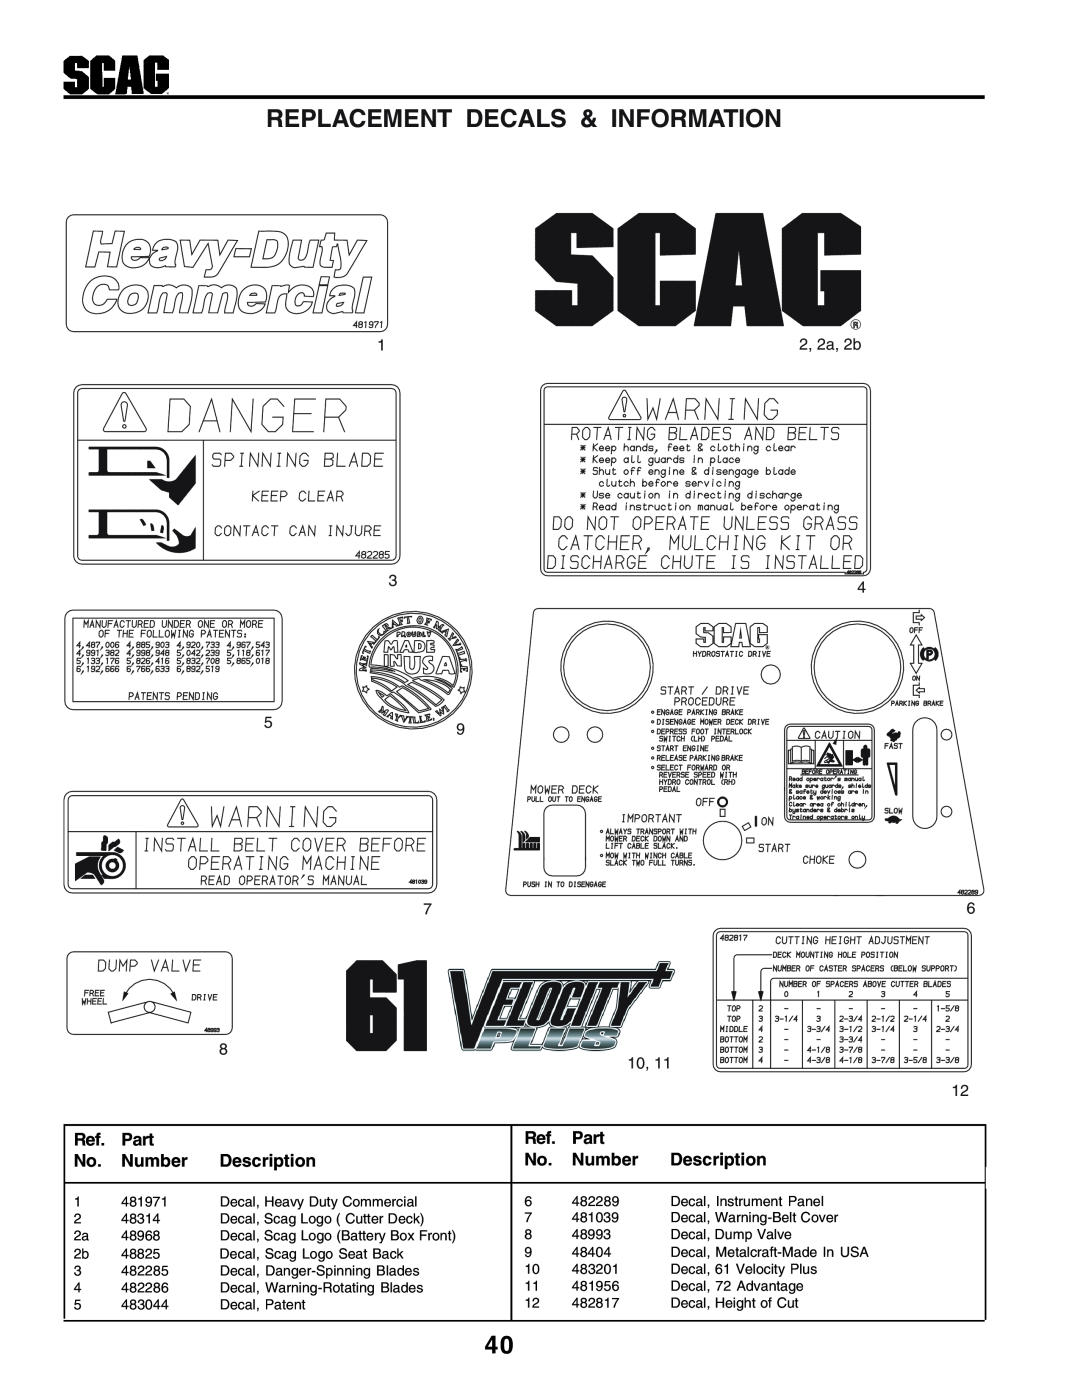 Scag Power Equipment STHM manual Replacement Decals & Information, Part, Number, Description 